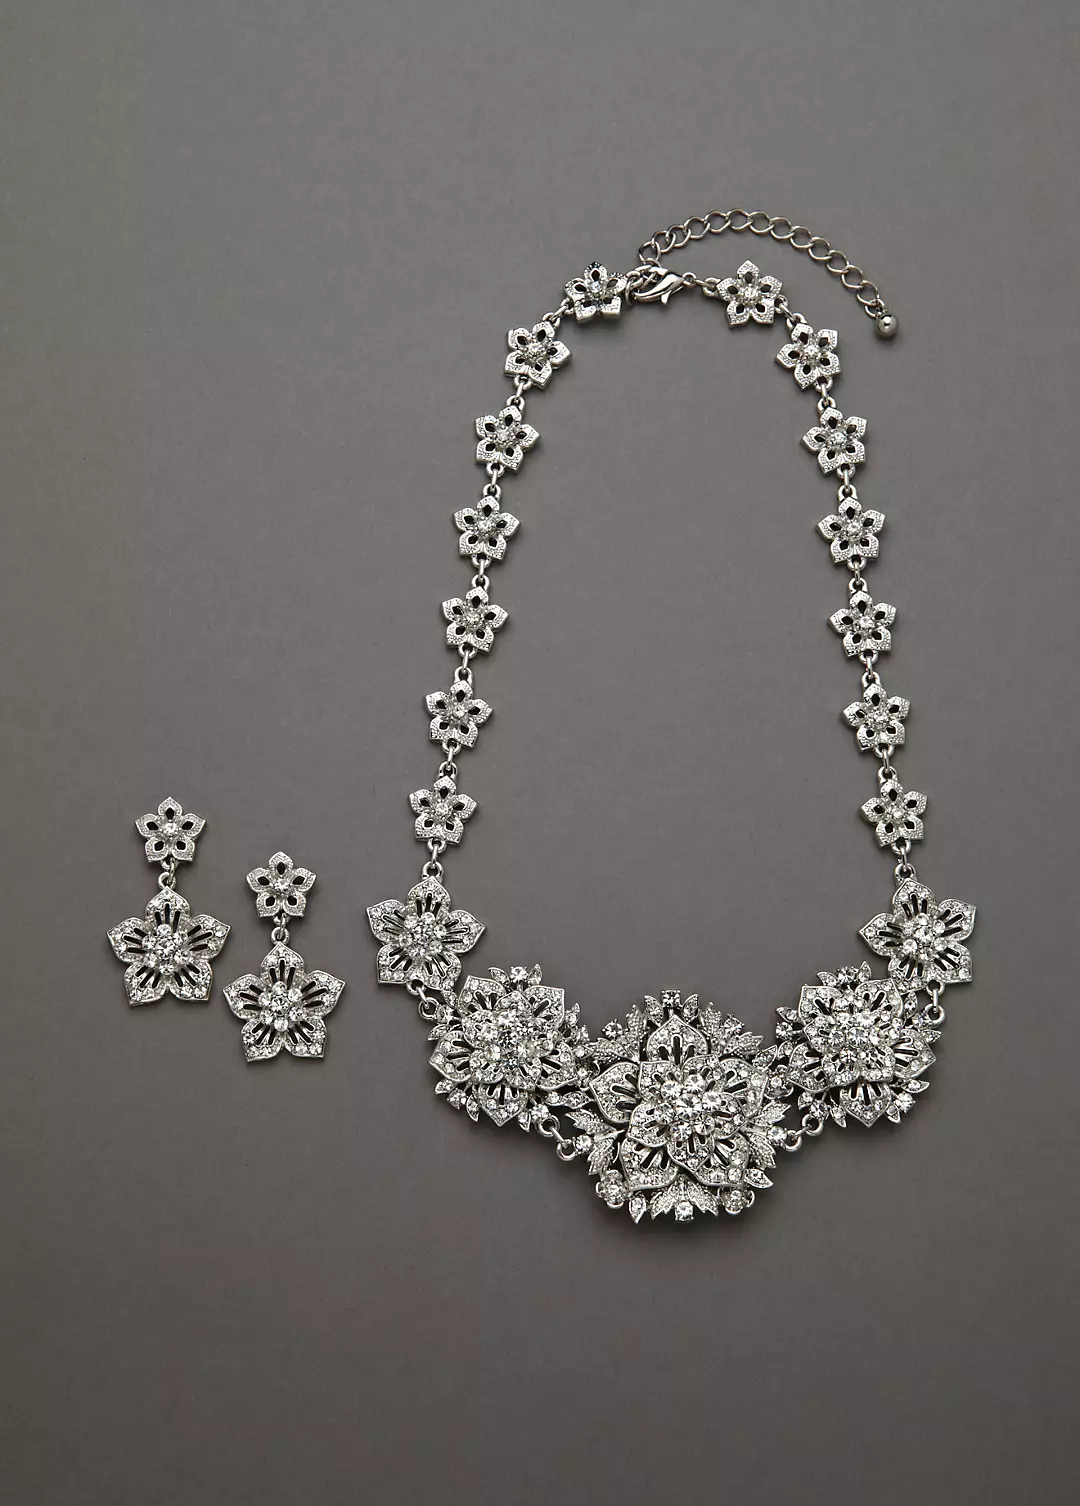 Bold Crystal Flower Necklace and Earring Set Image